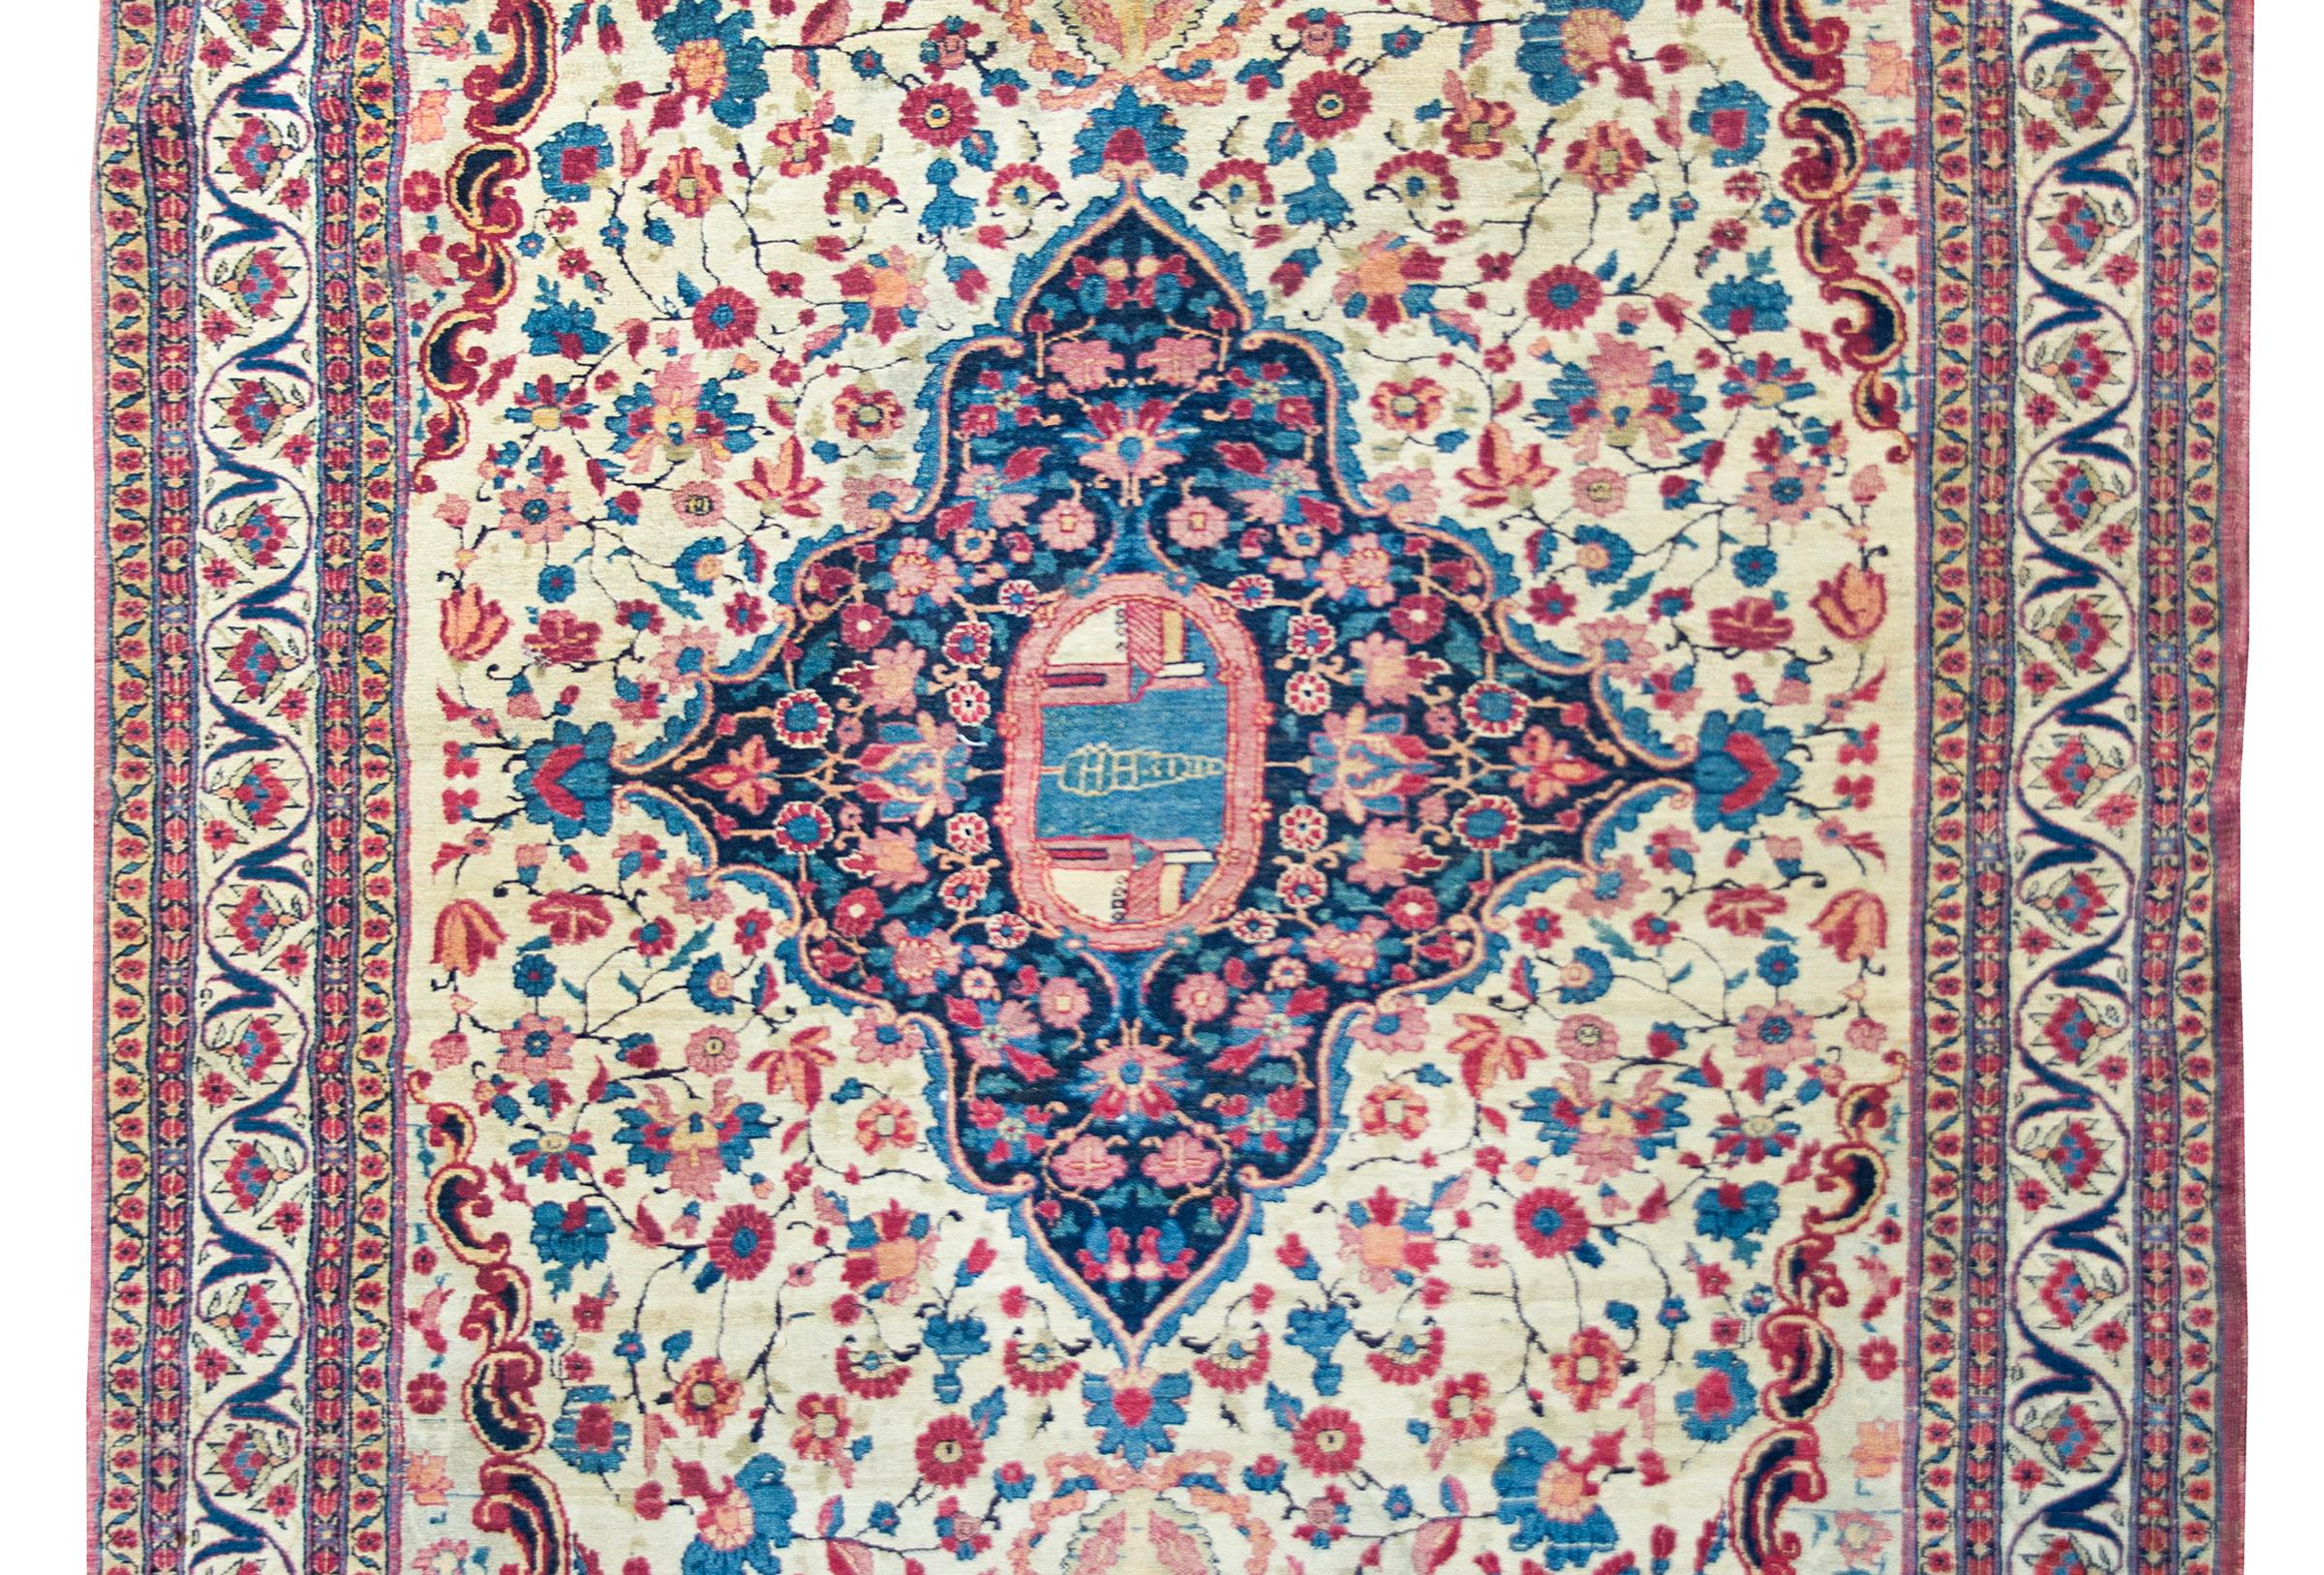 An incredible early 20th century Persian Tehran rug with a large central medallion with a single cypress tree between two buildings living amidst a field of flowers, and all surrounded by a wide border with more stylized flowers and scrolling vines,